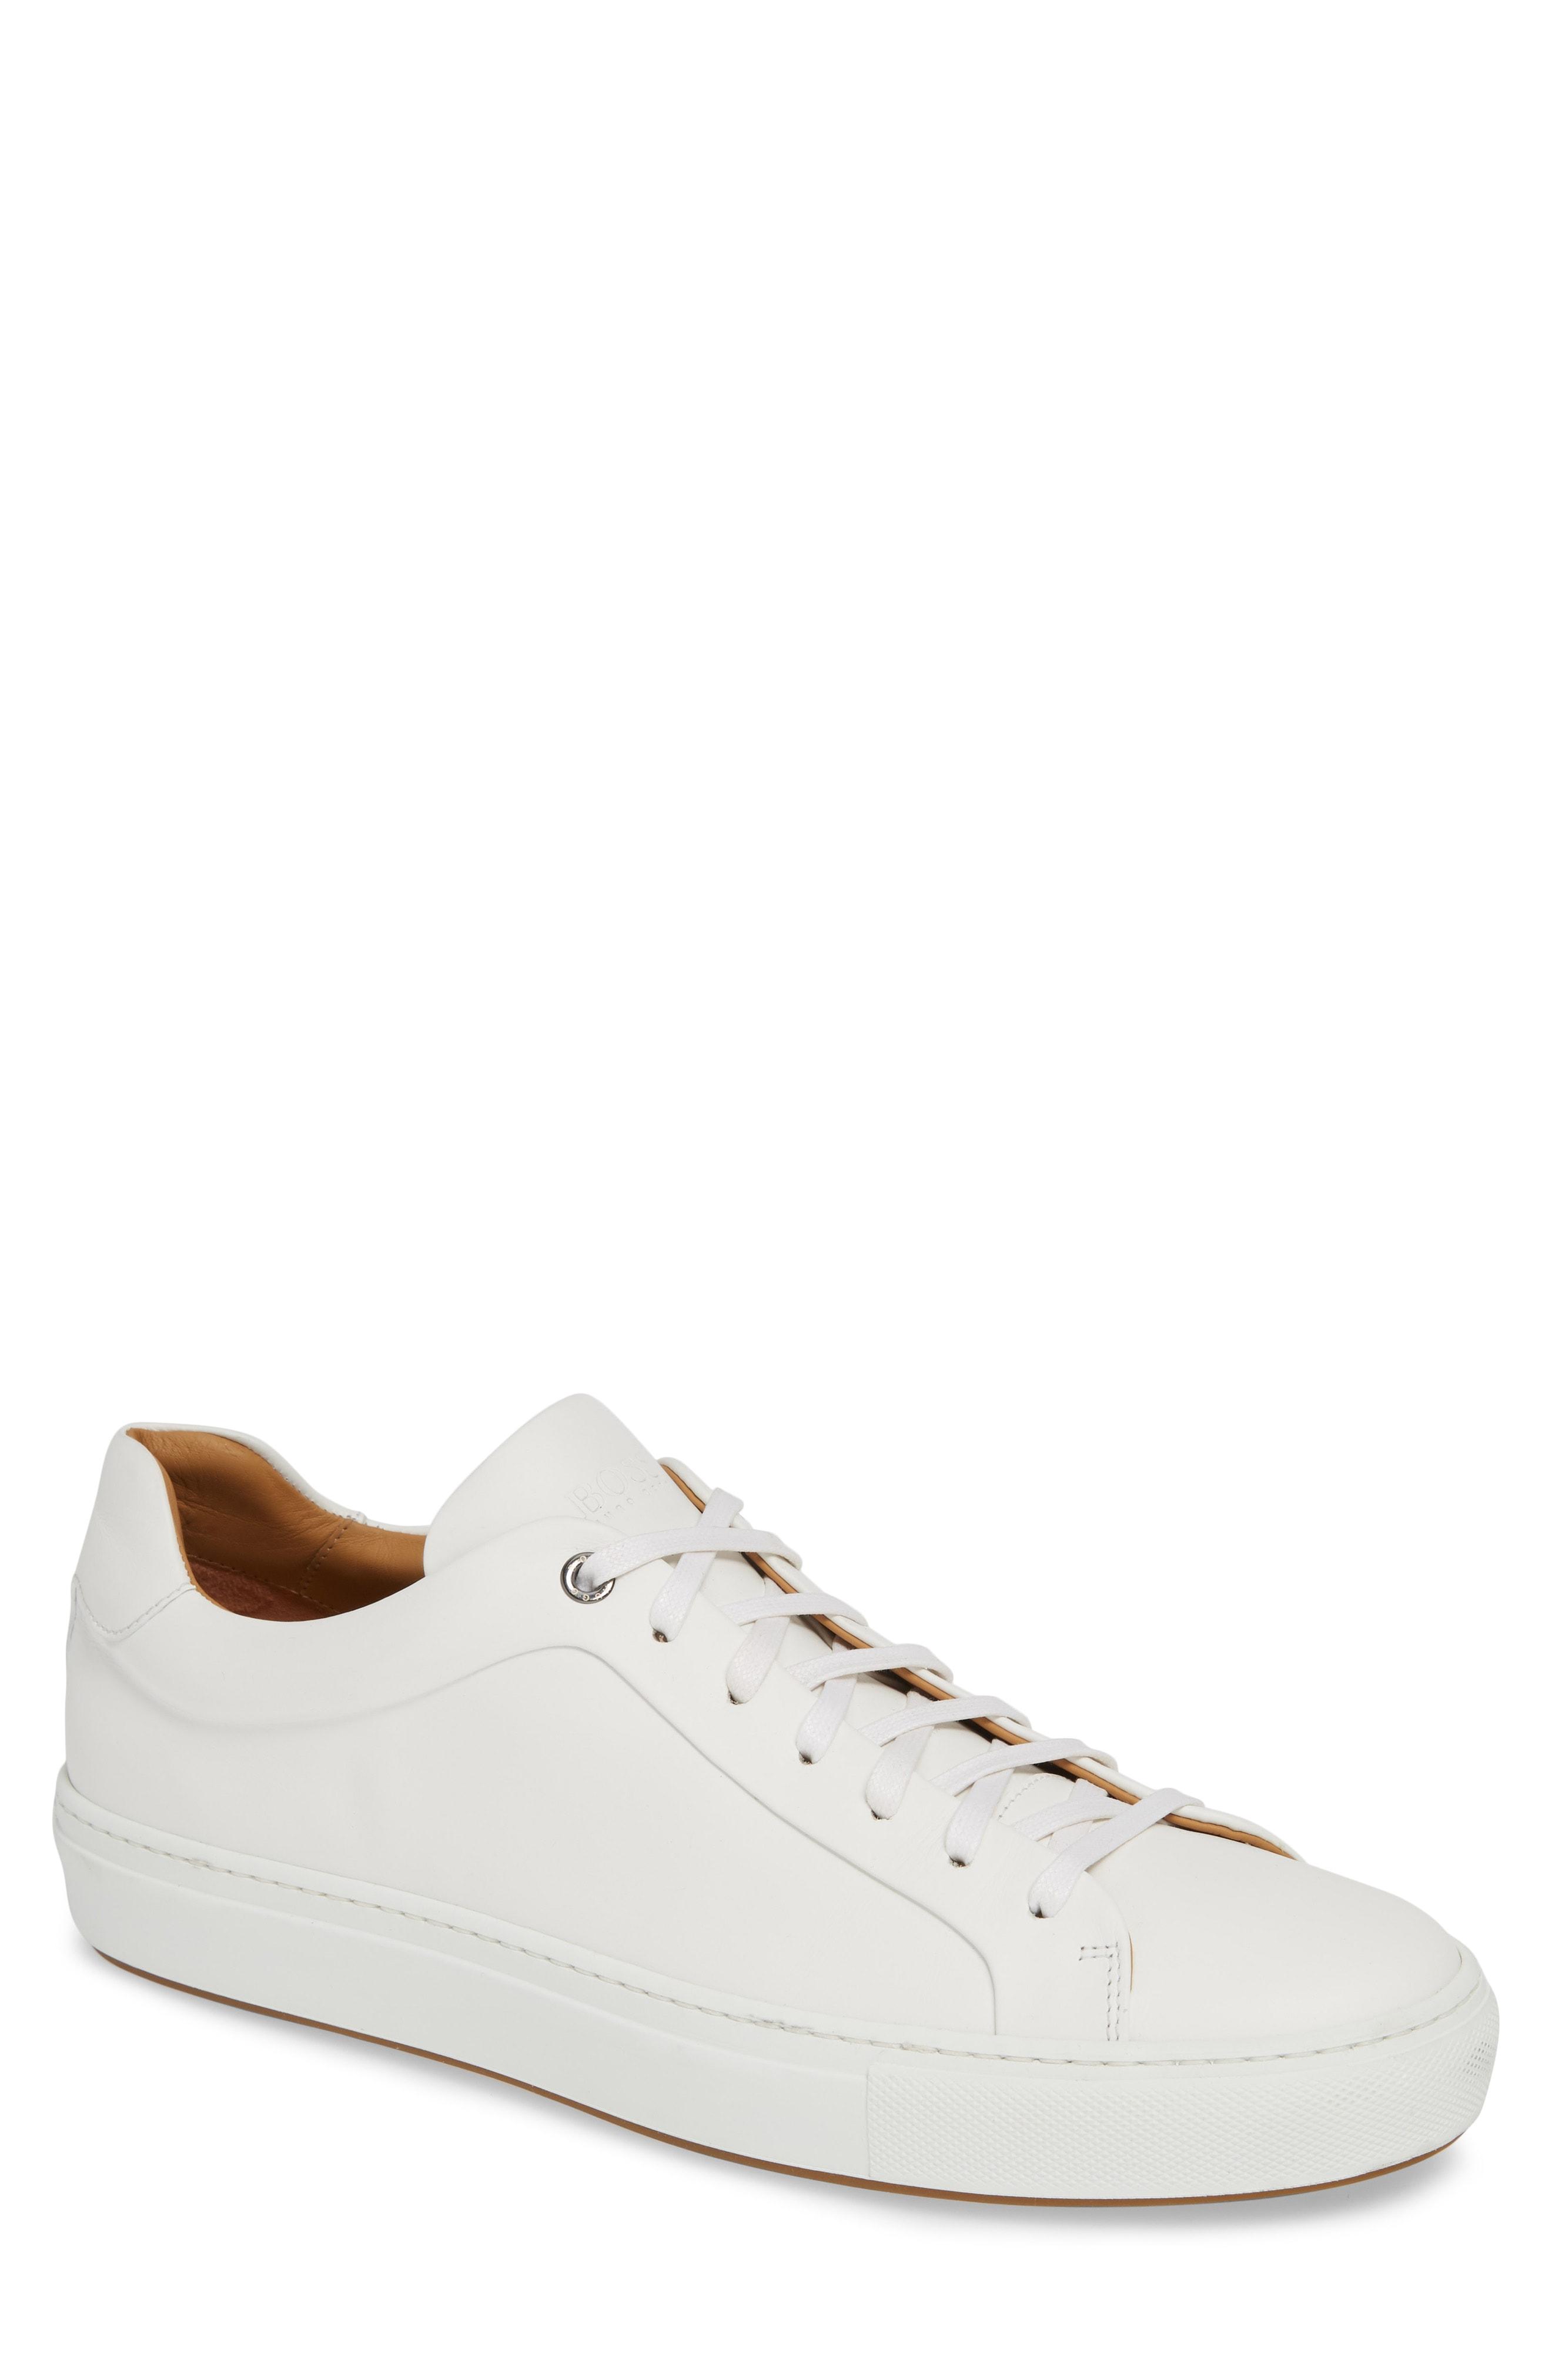 BOSS Leather Mirage Sneaker in White Leather (White) for Men - Lyst